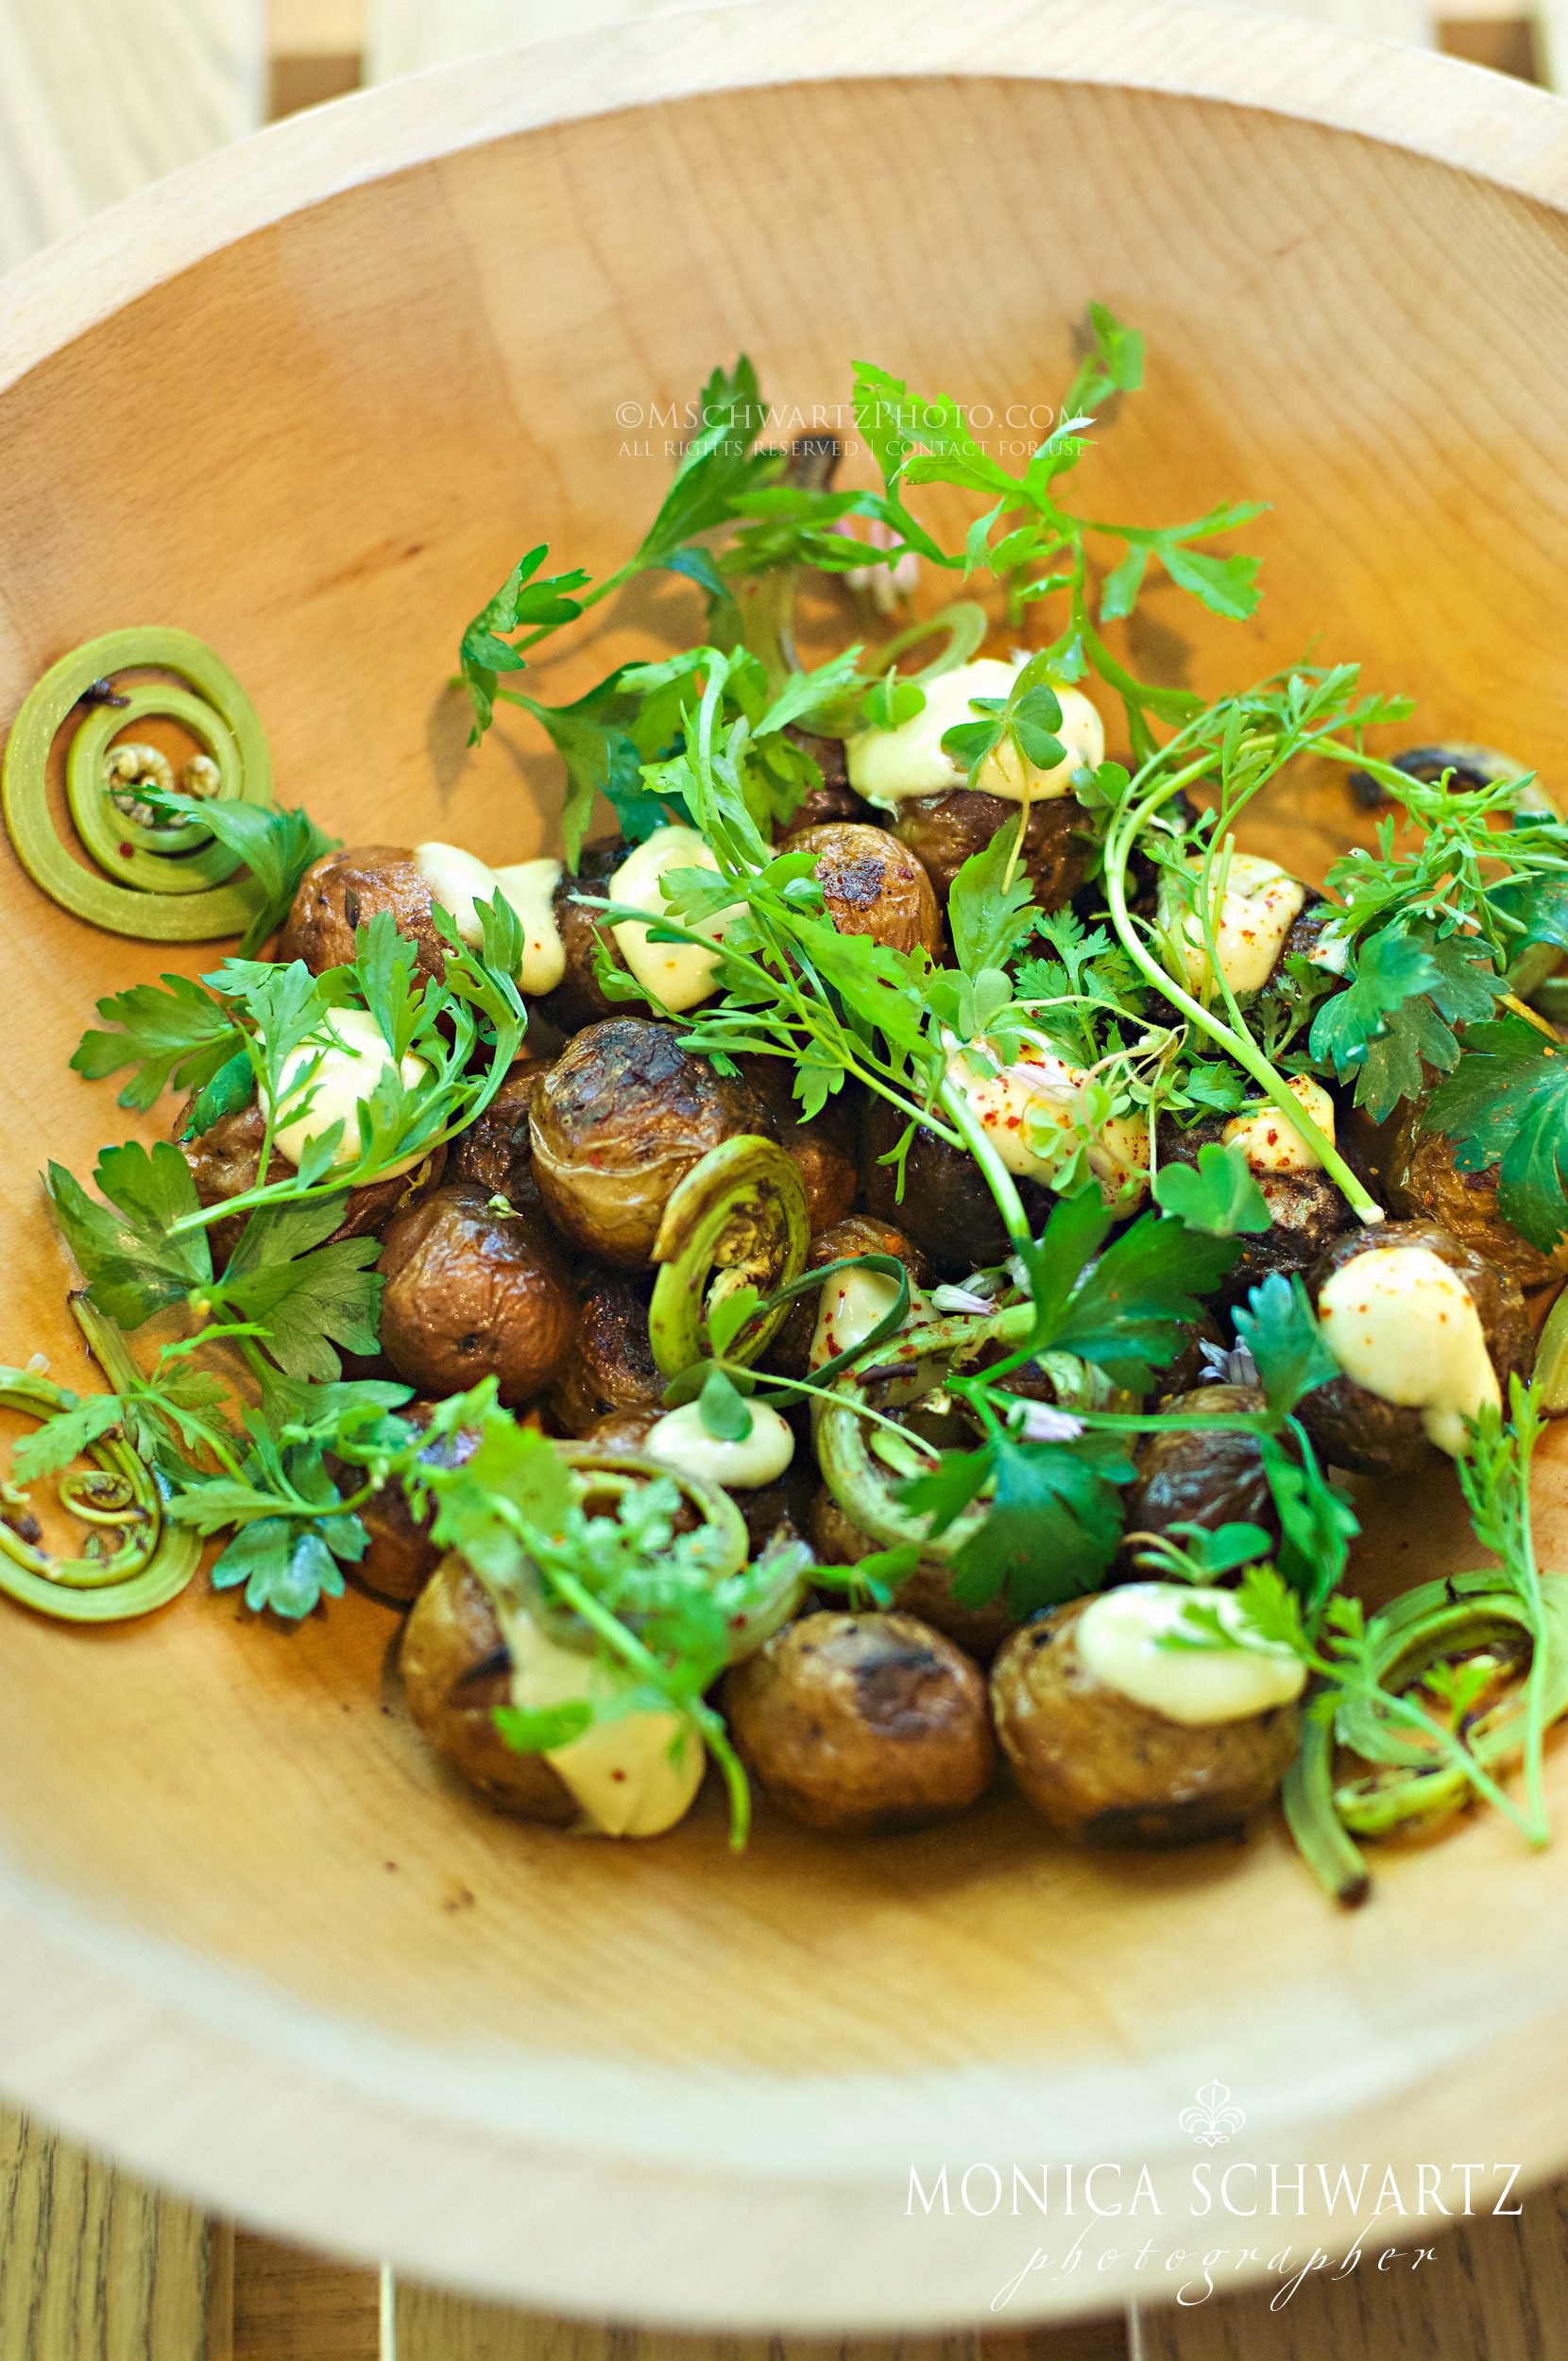 Roasted-Potatoes-and-Fiddlehead-Ferns-with-Green-Garlic-Aioli-and-Fines-Herbes-at-the-Shed-in-Healdsburg-California